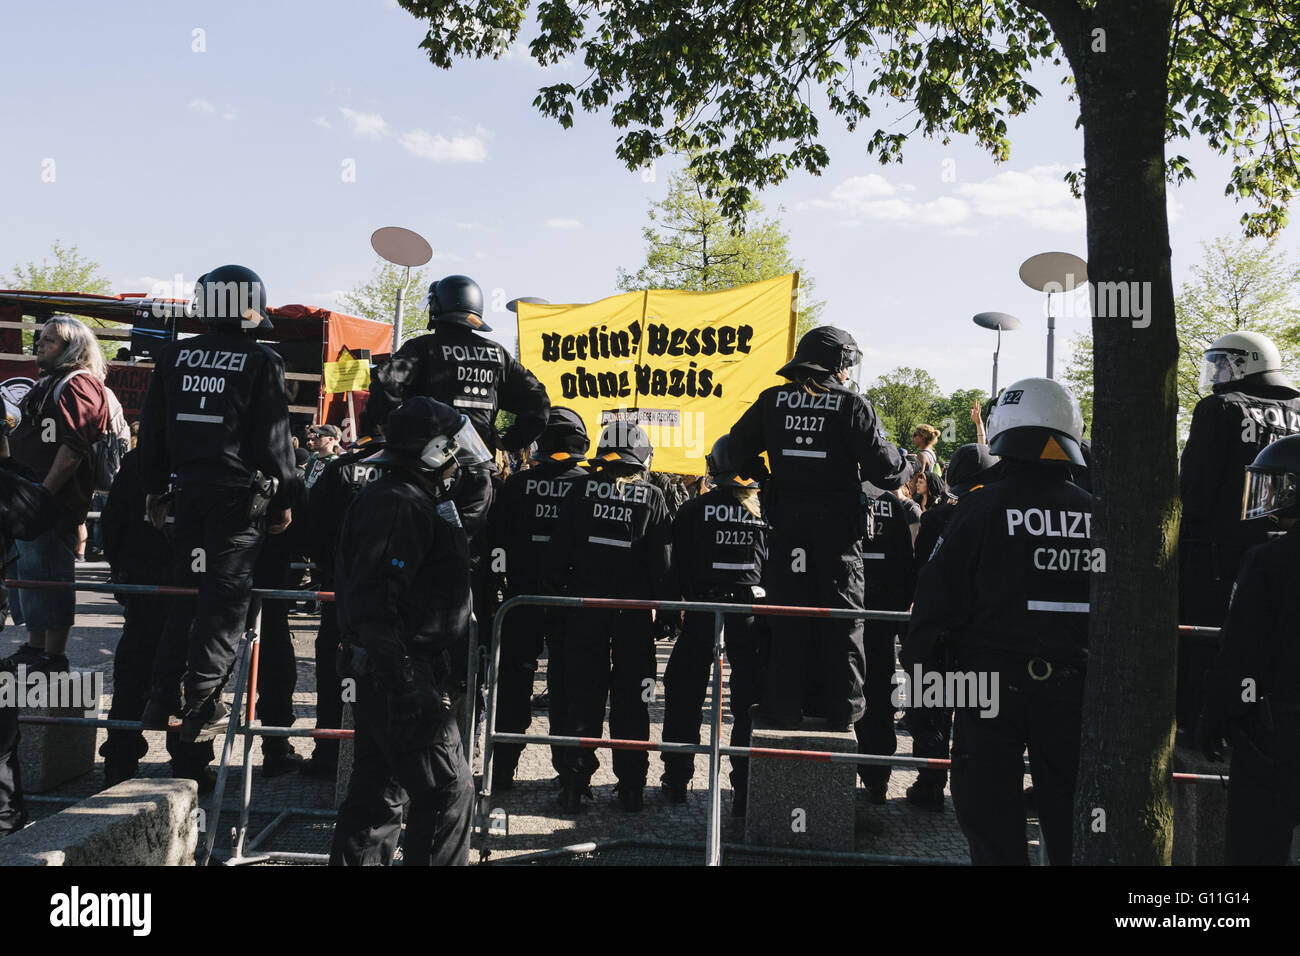 Berlin, Berlin, Germany. 7th May, 2016. 'Berlin! Better without Nazis' A large banner behind a police line during the counter protests against the rally held under the motto 'Merkel muss weg![Merkel must go]' organised by far-right group 'We for Berlin & We for Germany' Credit:  Jan Scheunert/ZUMA Wire/Alamy Live News Stock Photo